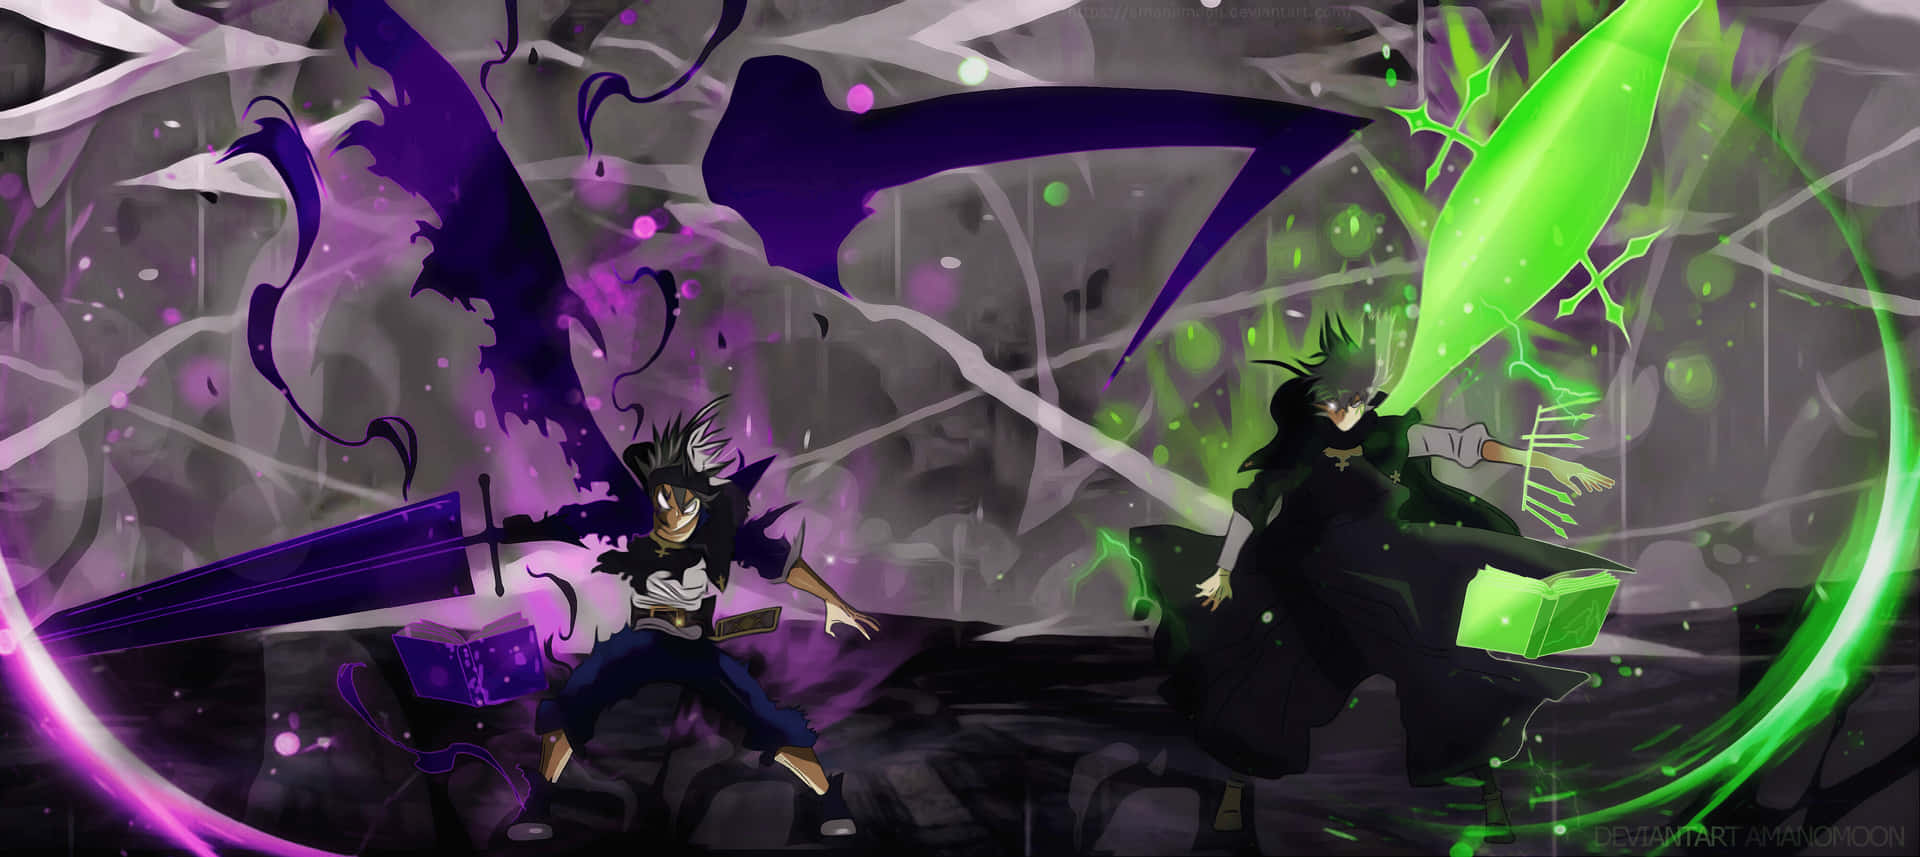 Prepare to be amazed! Asta harnesses the power of a rare demonic form. Wallpaper